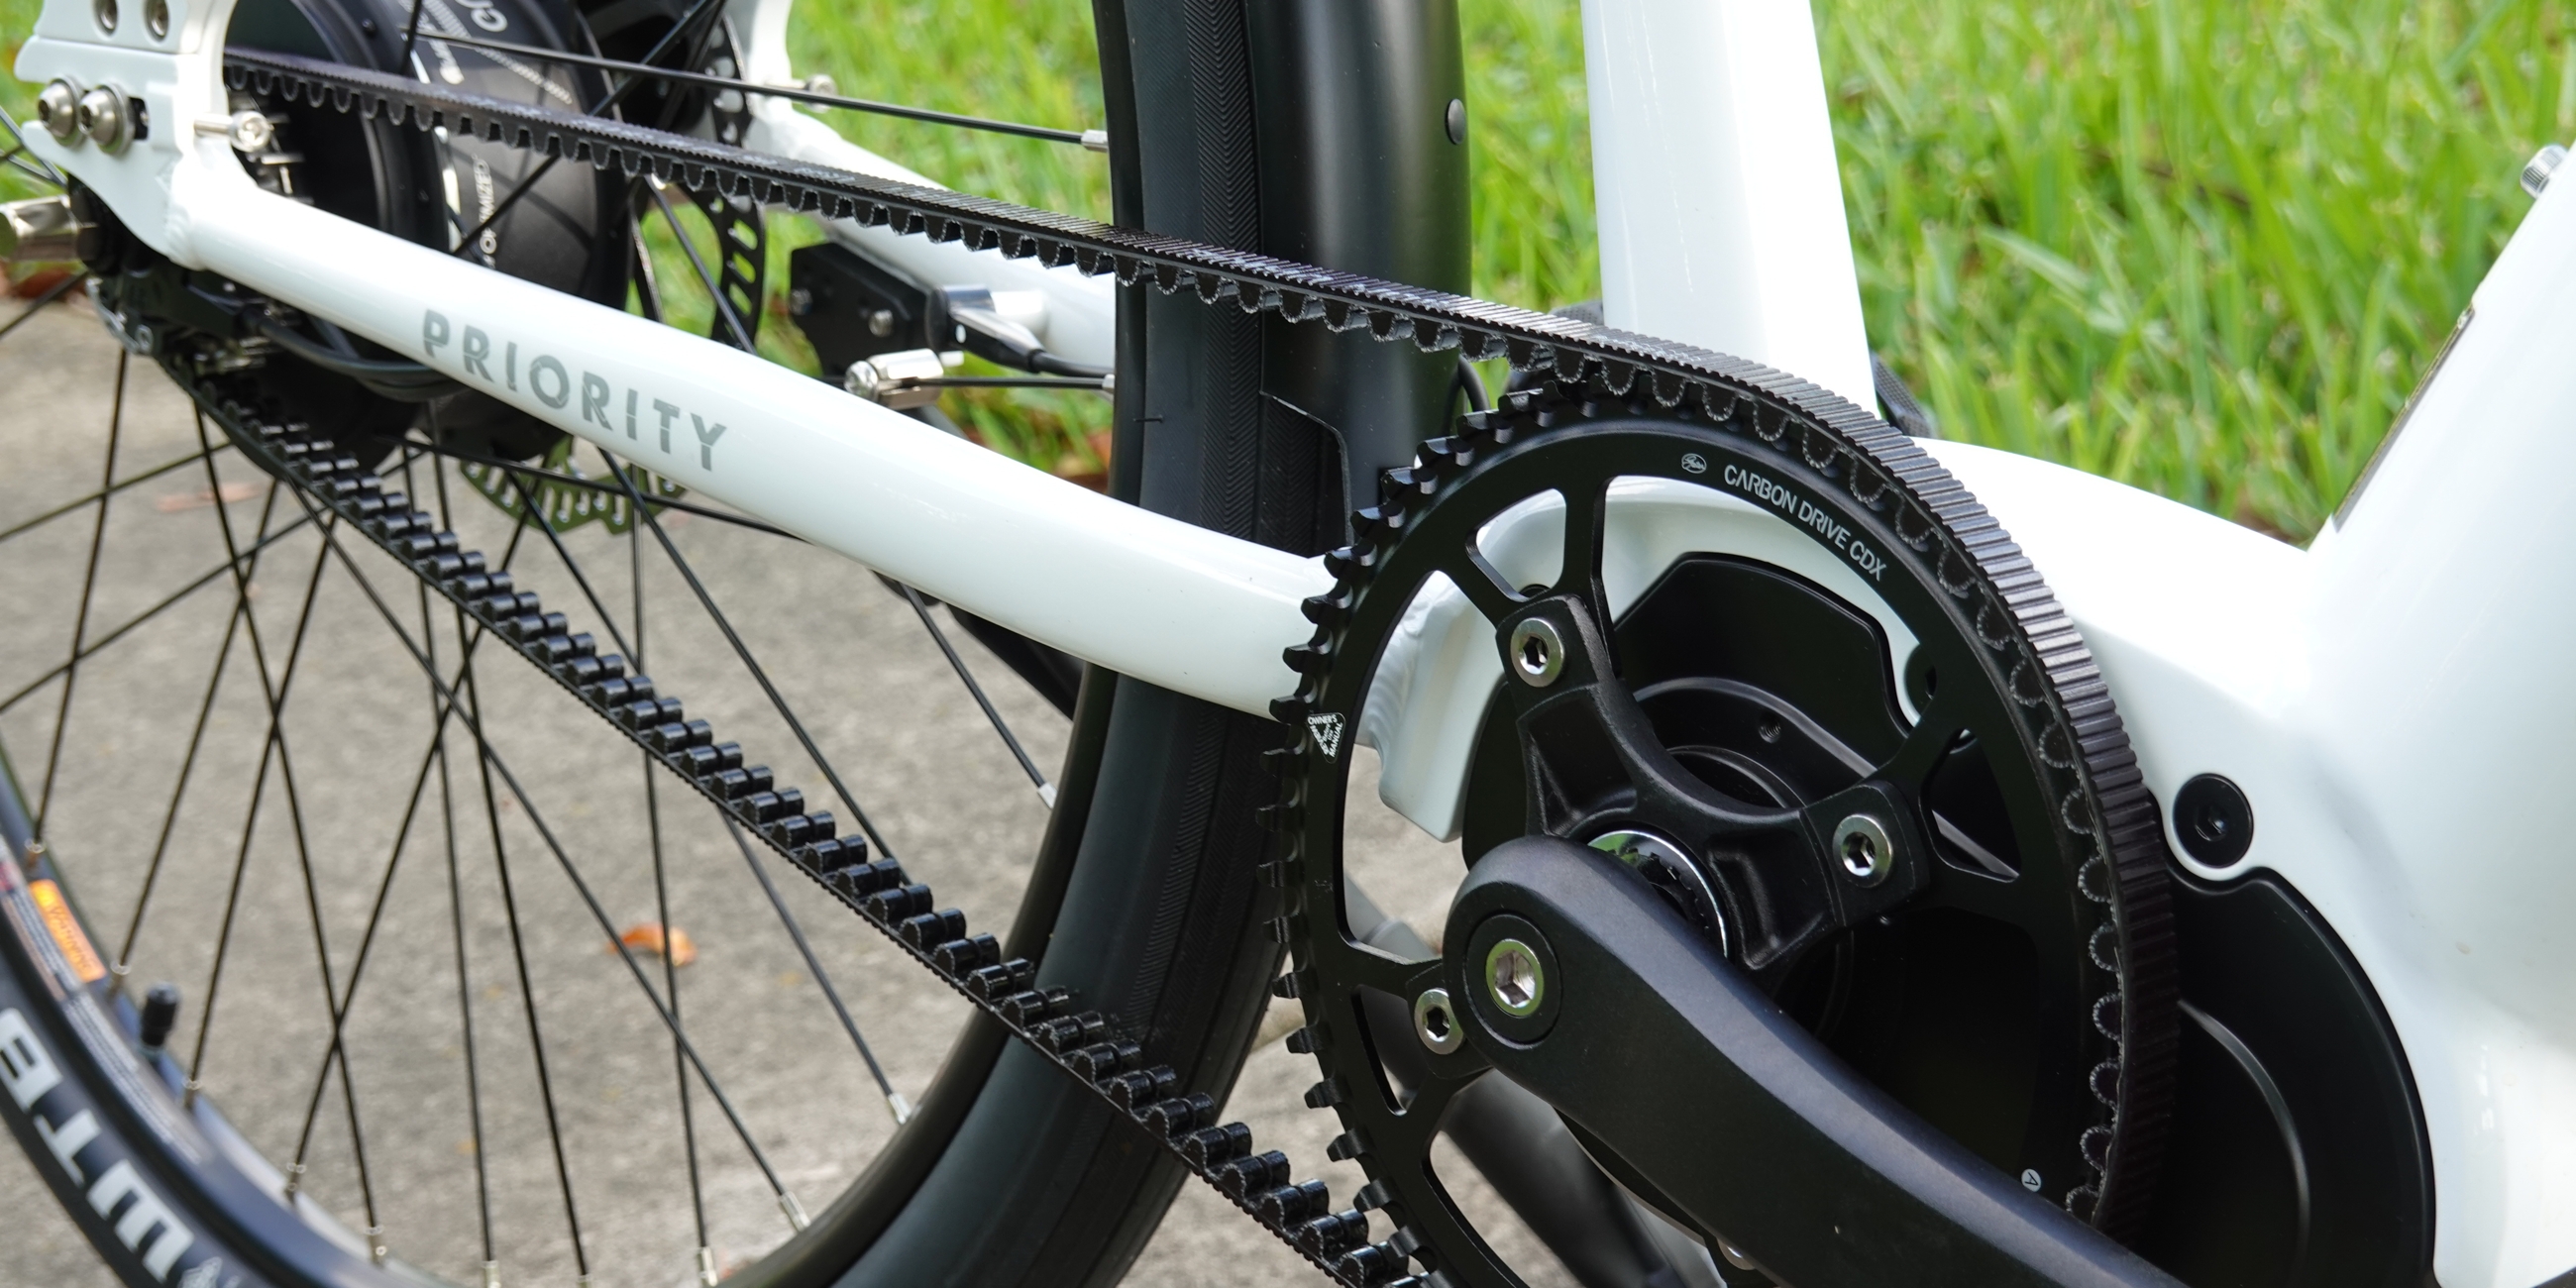 Belt drives on electric bicycles what are the pros and cons? Electrek